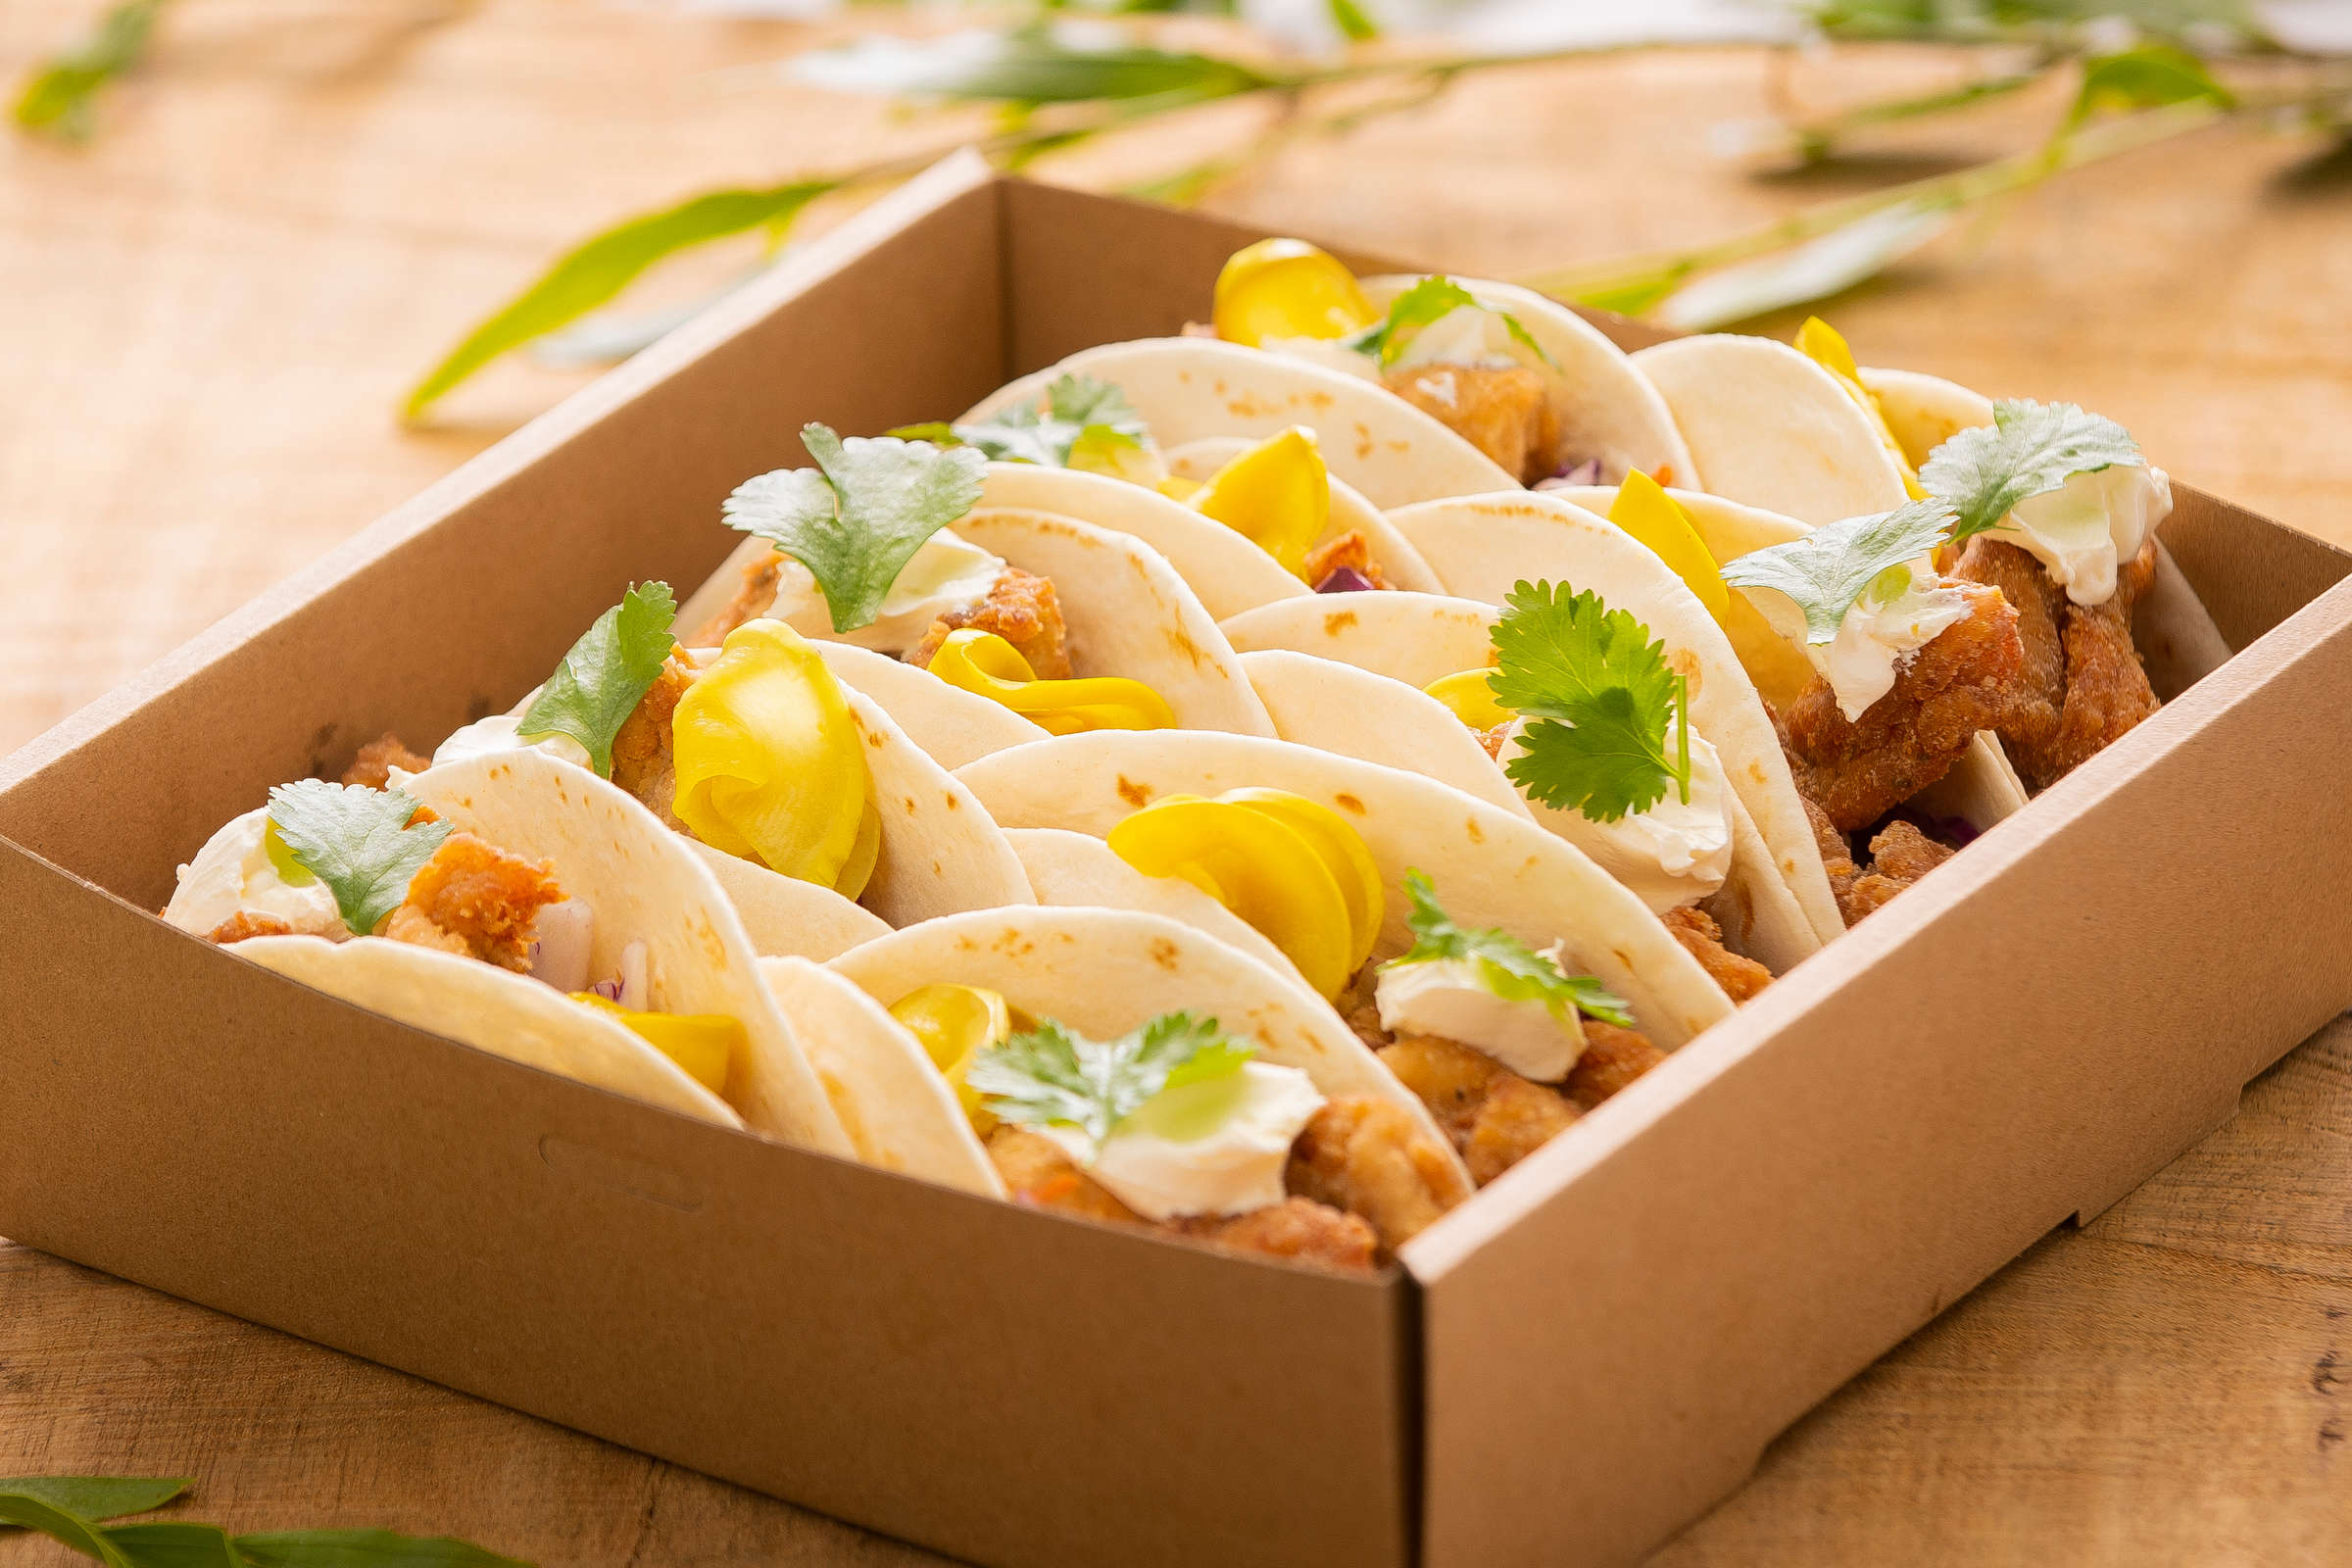 Taco box containing 10 tacos fillings include fried chicken and fried cauliflower. Credit: Richard Jupe.